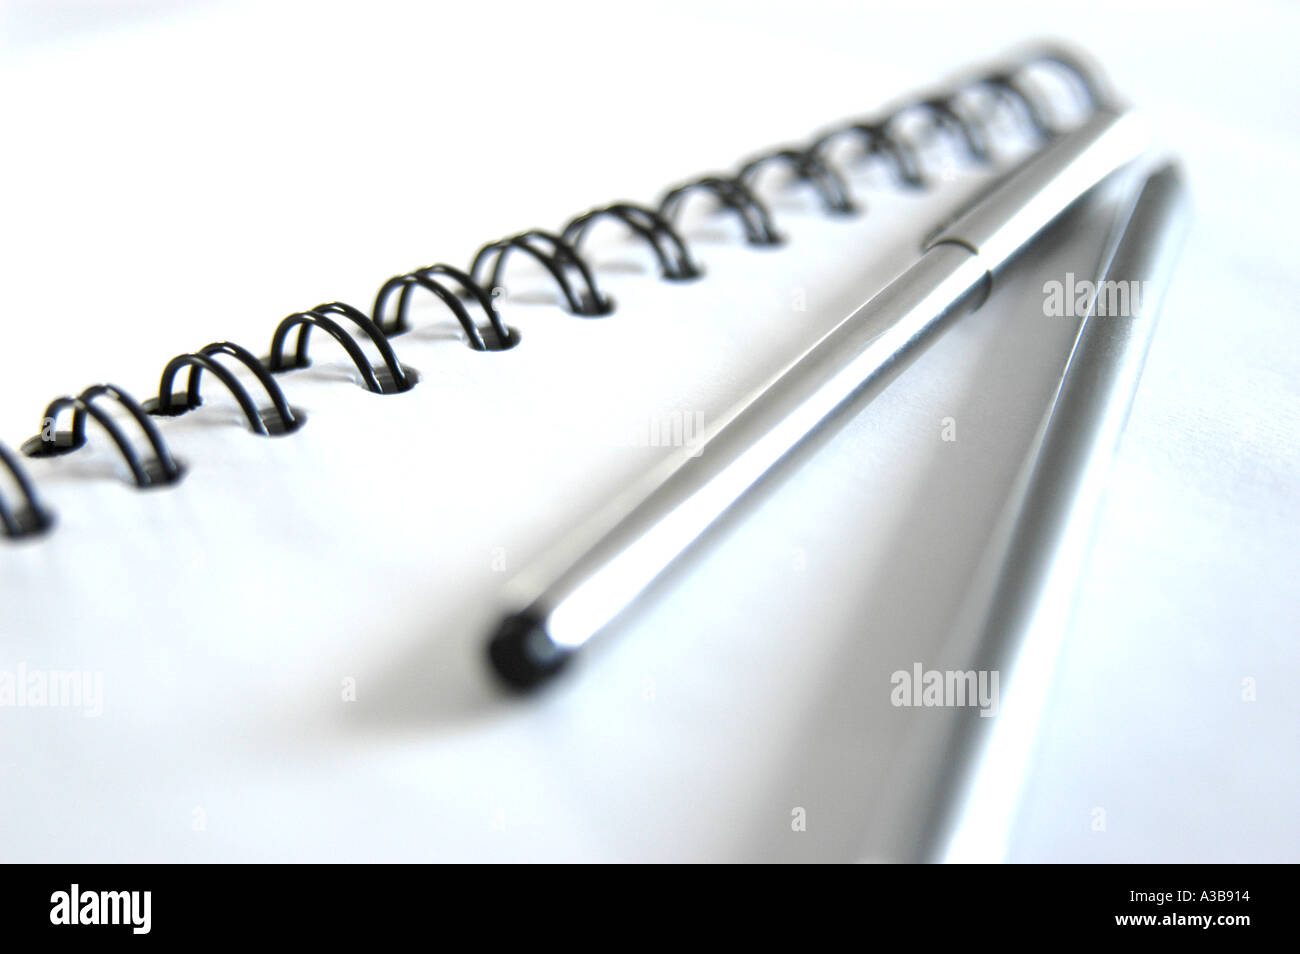 White note book with black spiral binding, stainless steel pen and silver pencil. Shot with shallow depth-of-field. Stock Photo